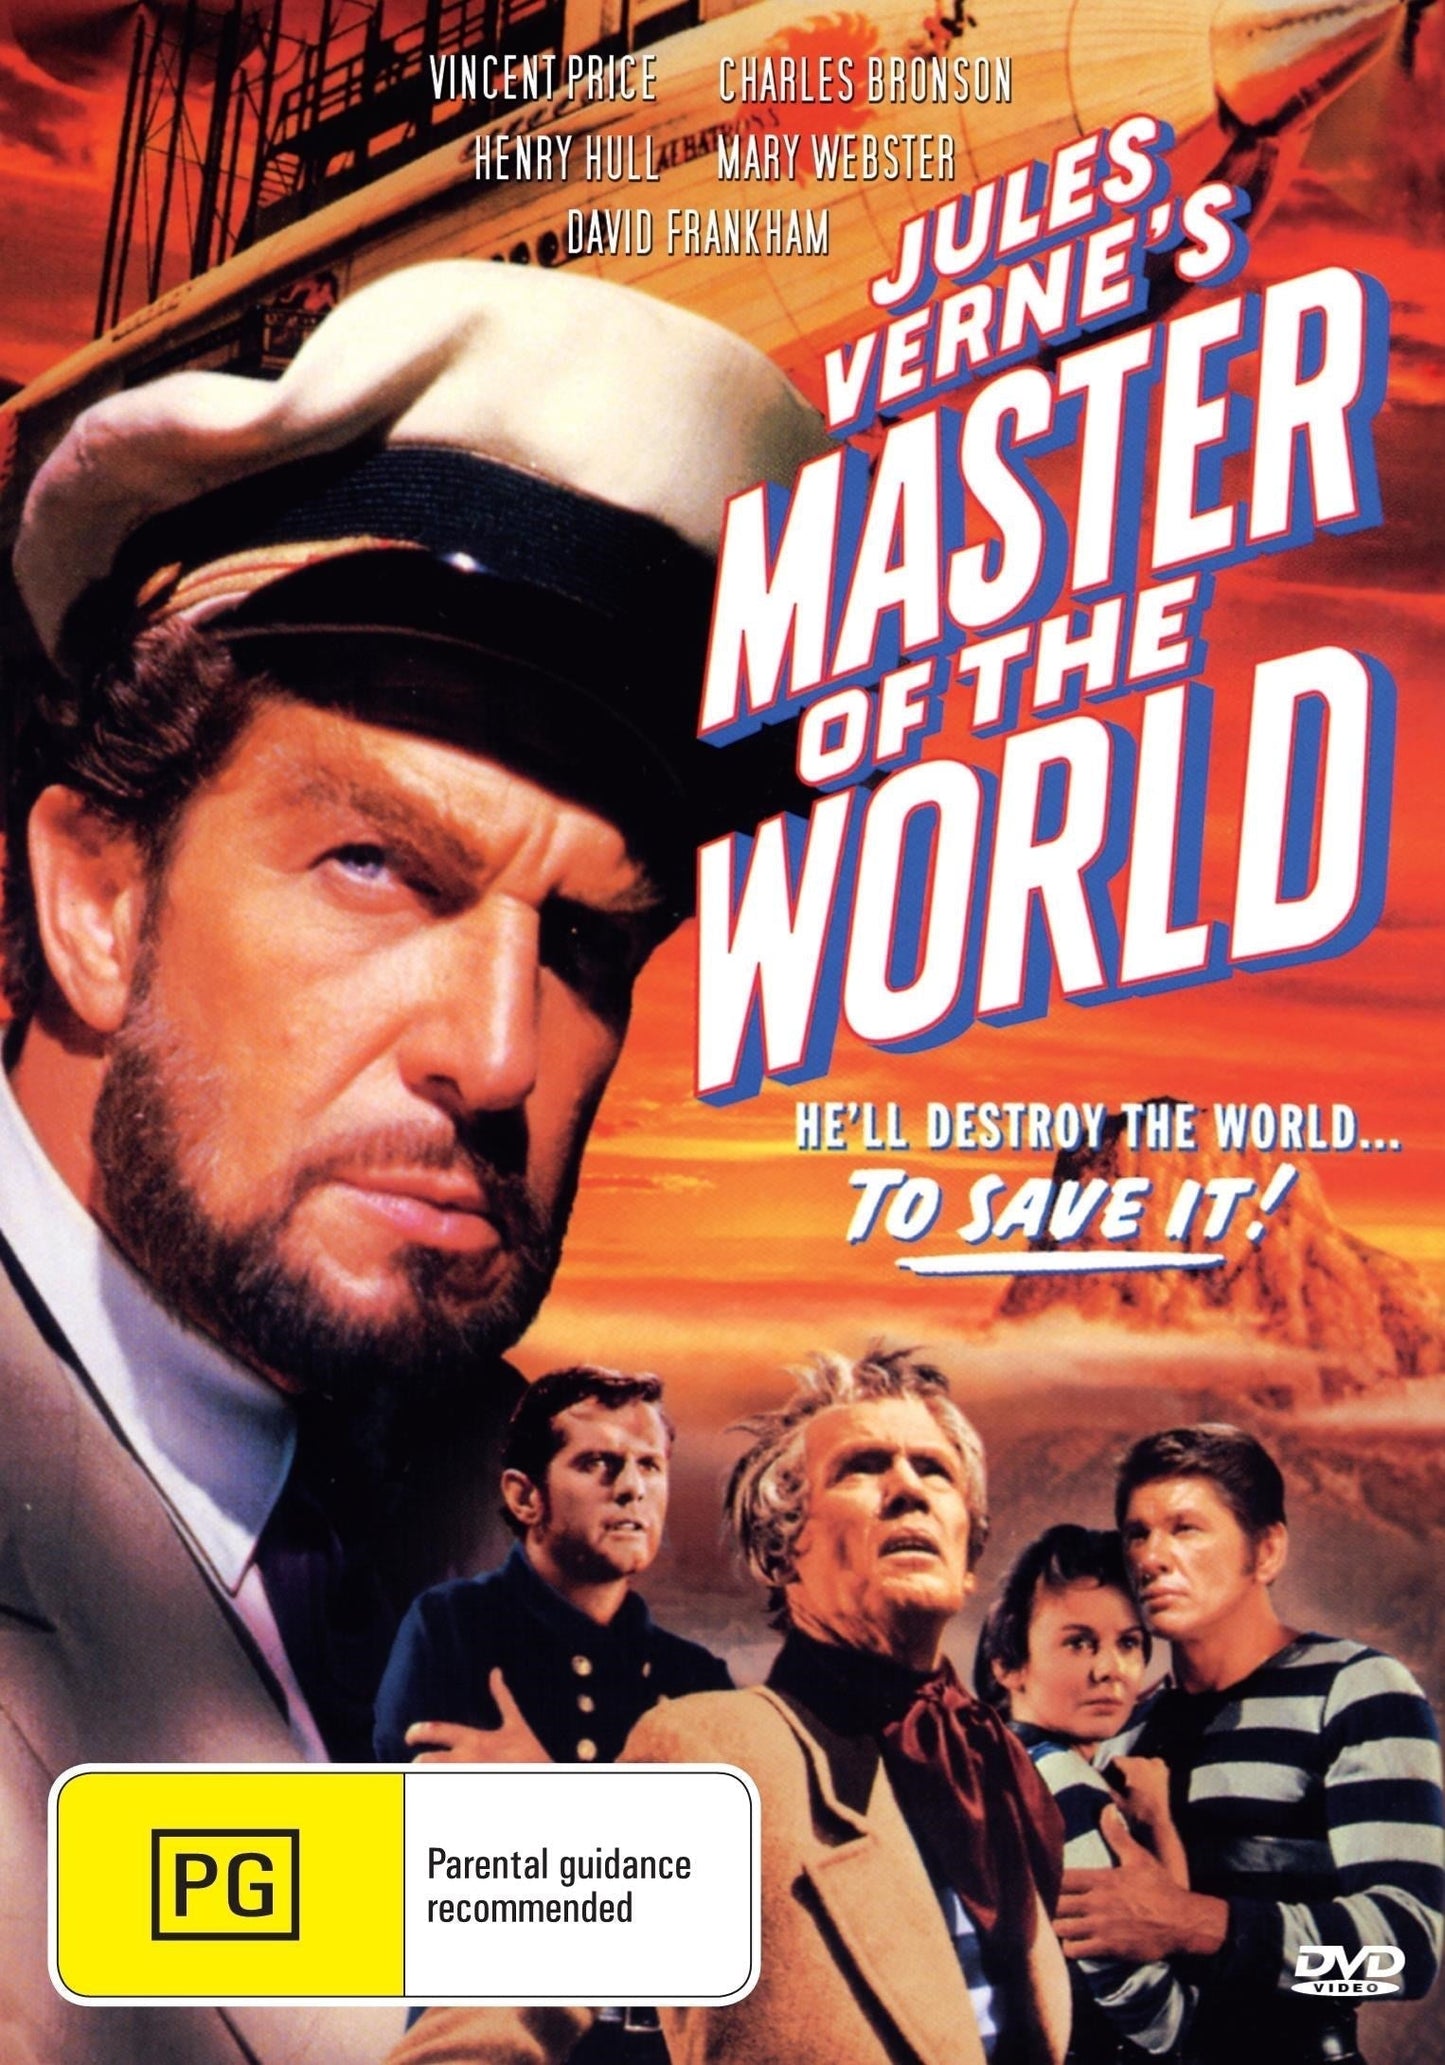 Master of the World rareandcollectibledvds